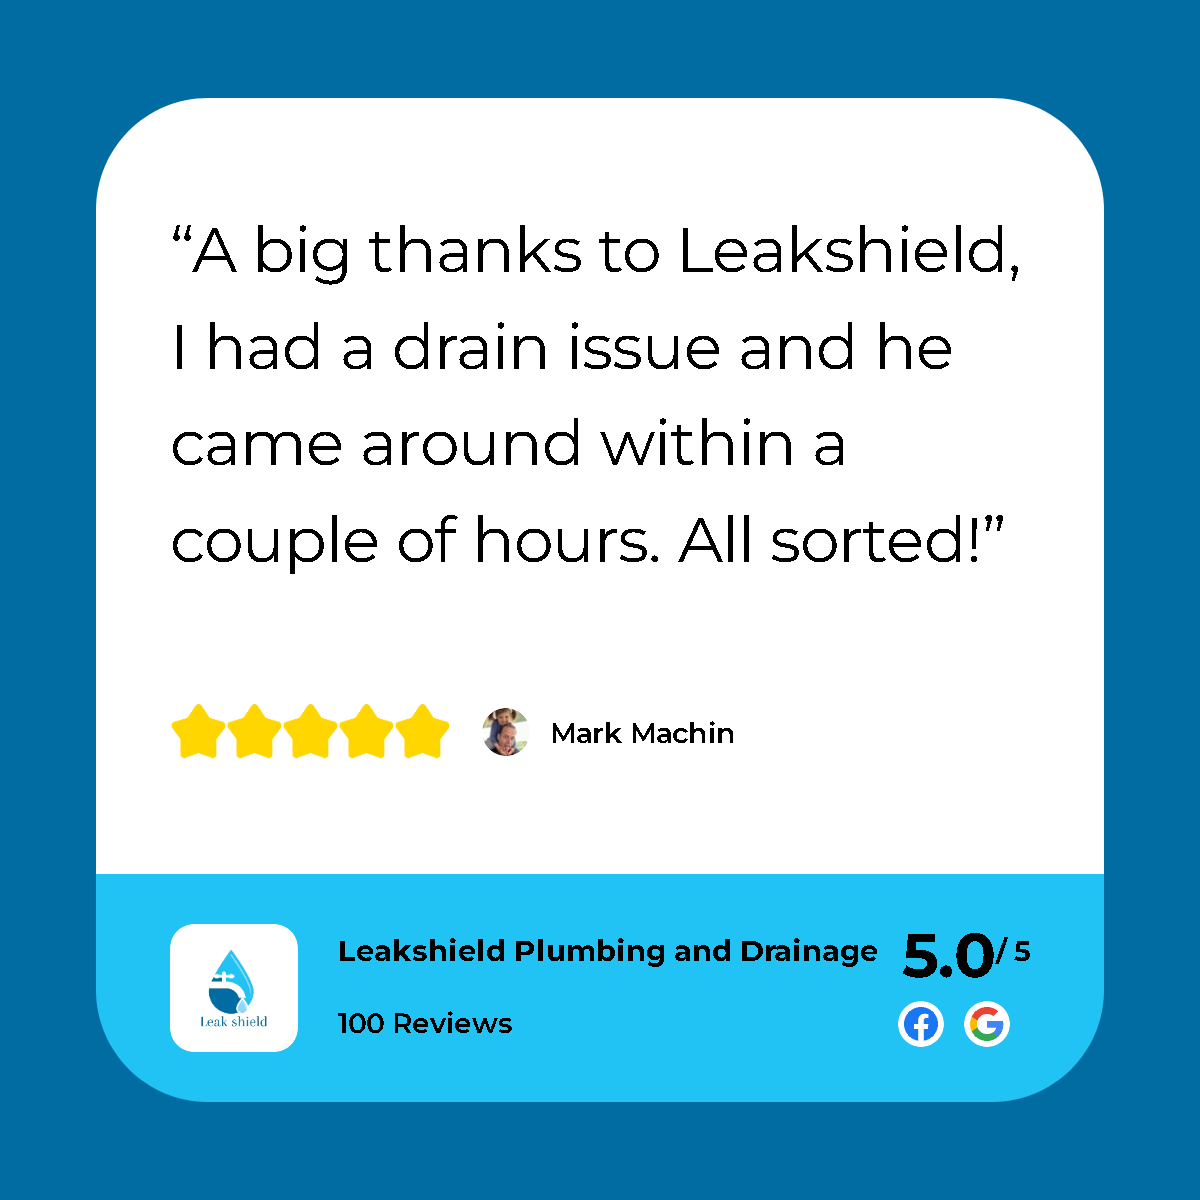 A big thanks to leakshield plumbing i had a drain issue and he came around with a.